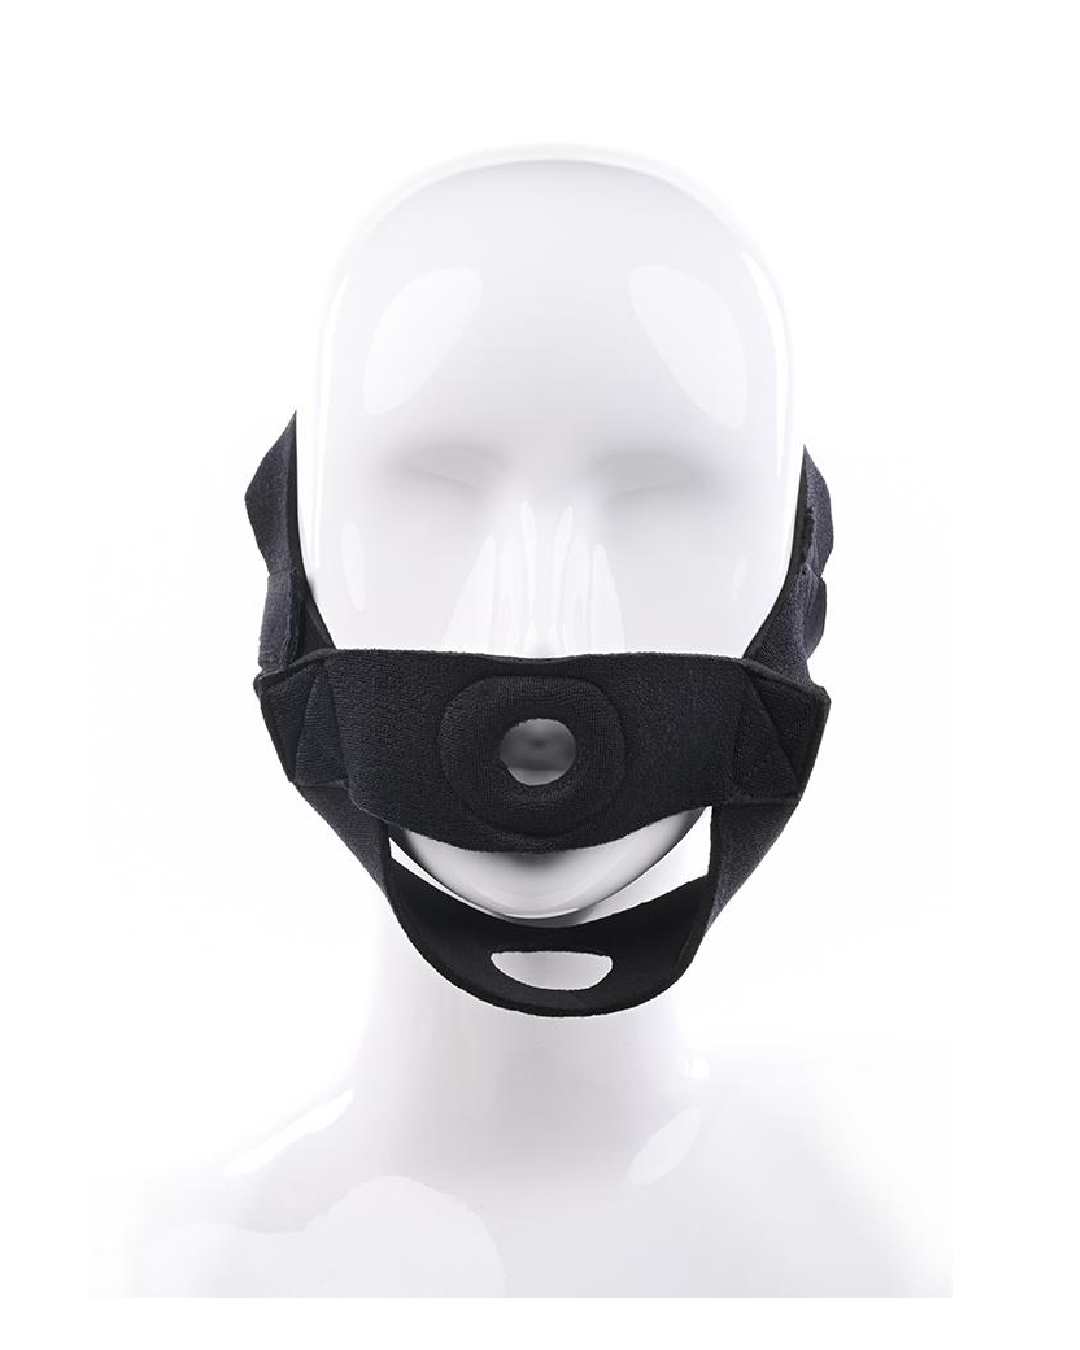 Sportsheets Face Strap-on Harness shown on mannequin front view